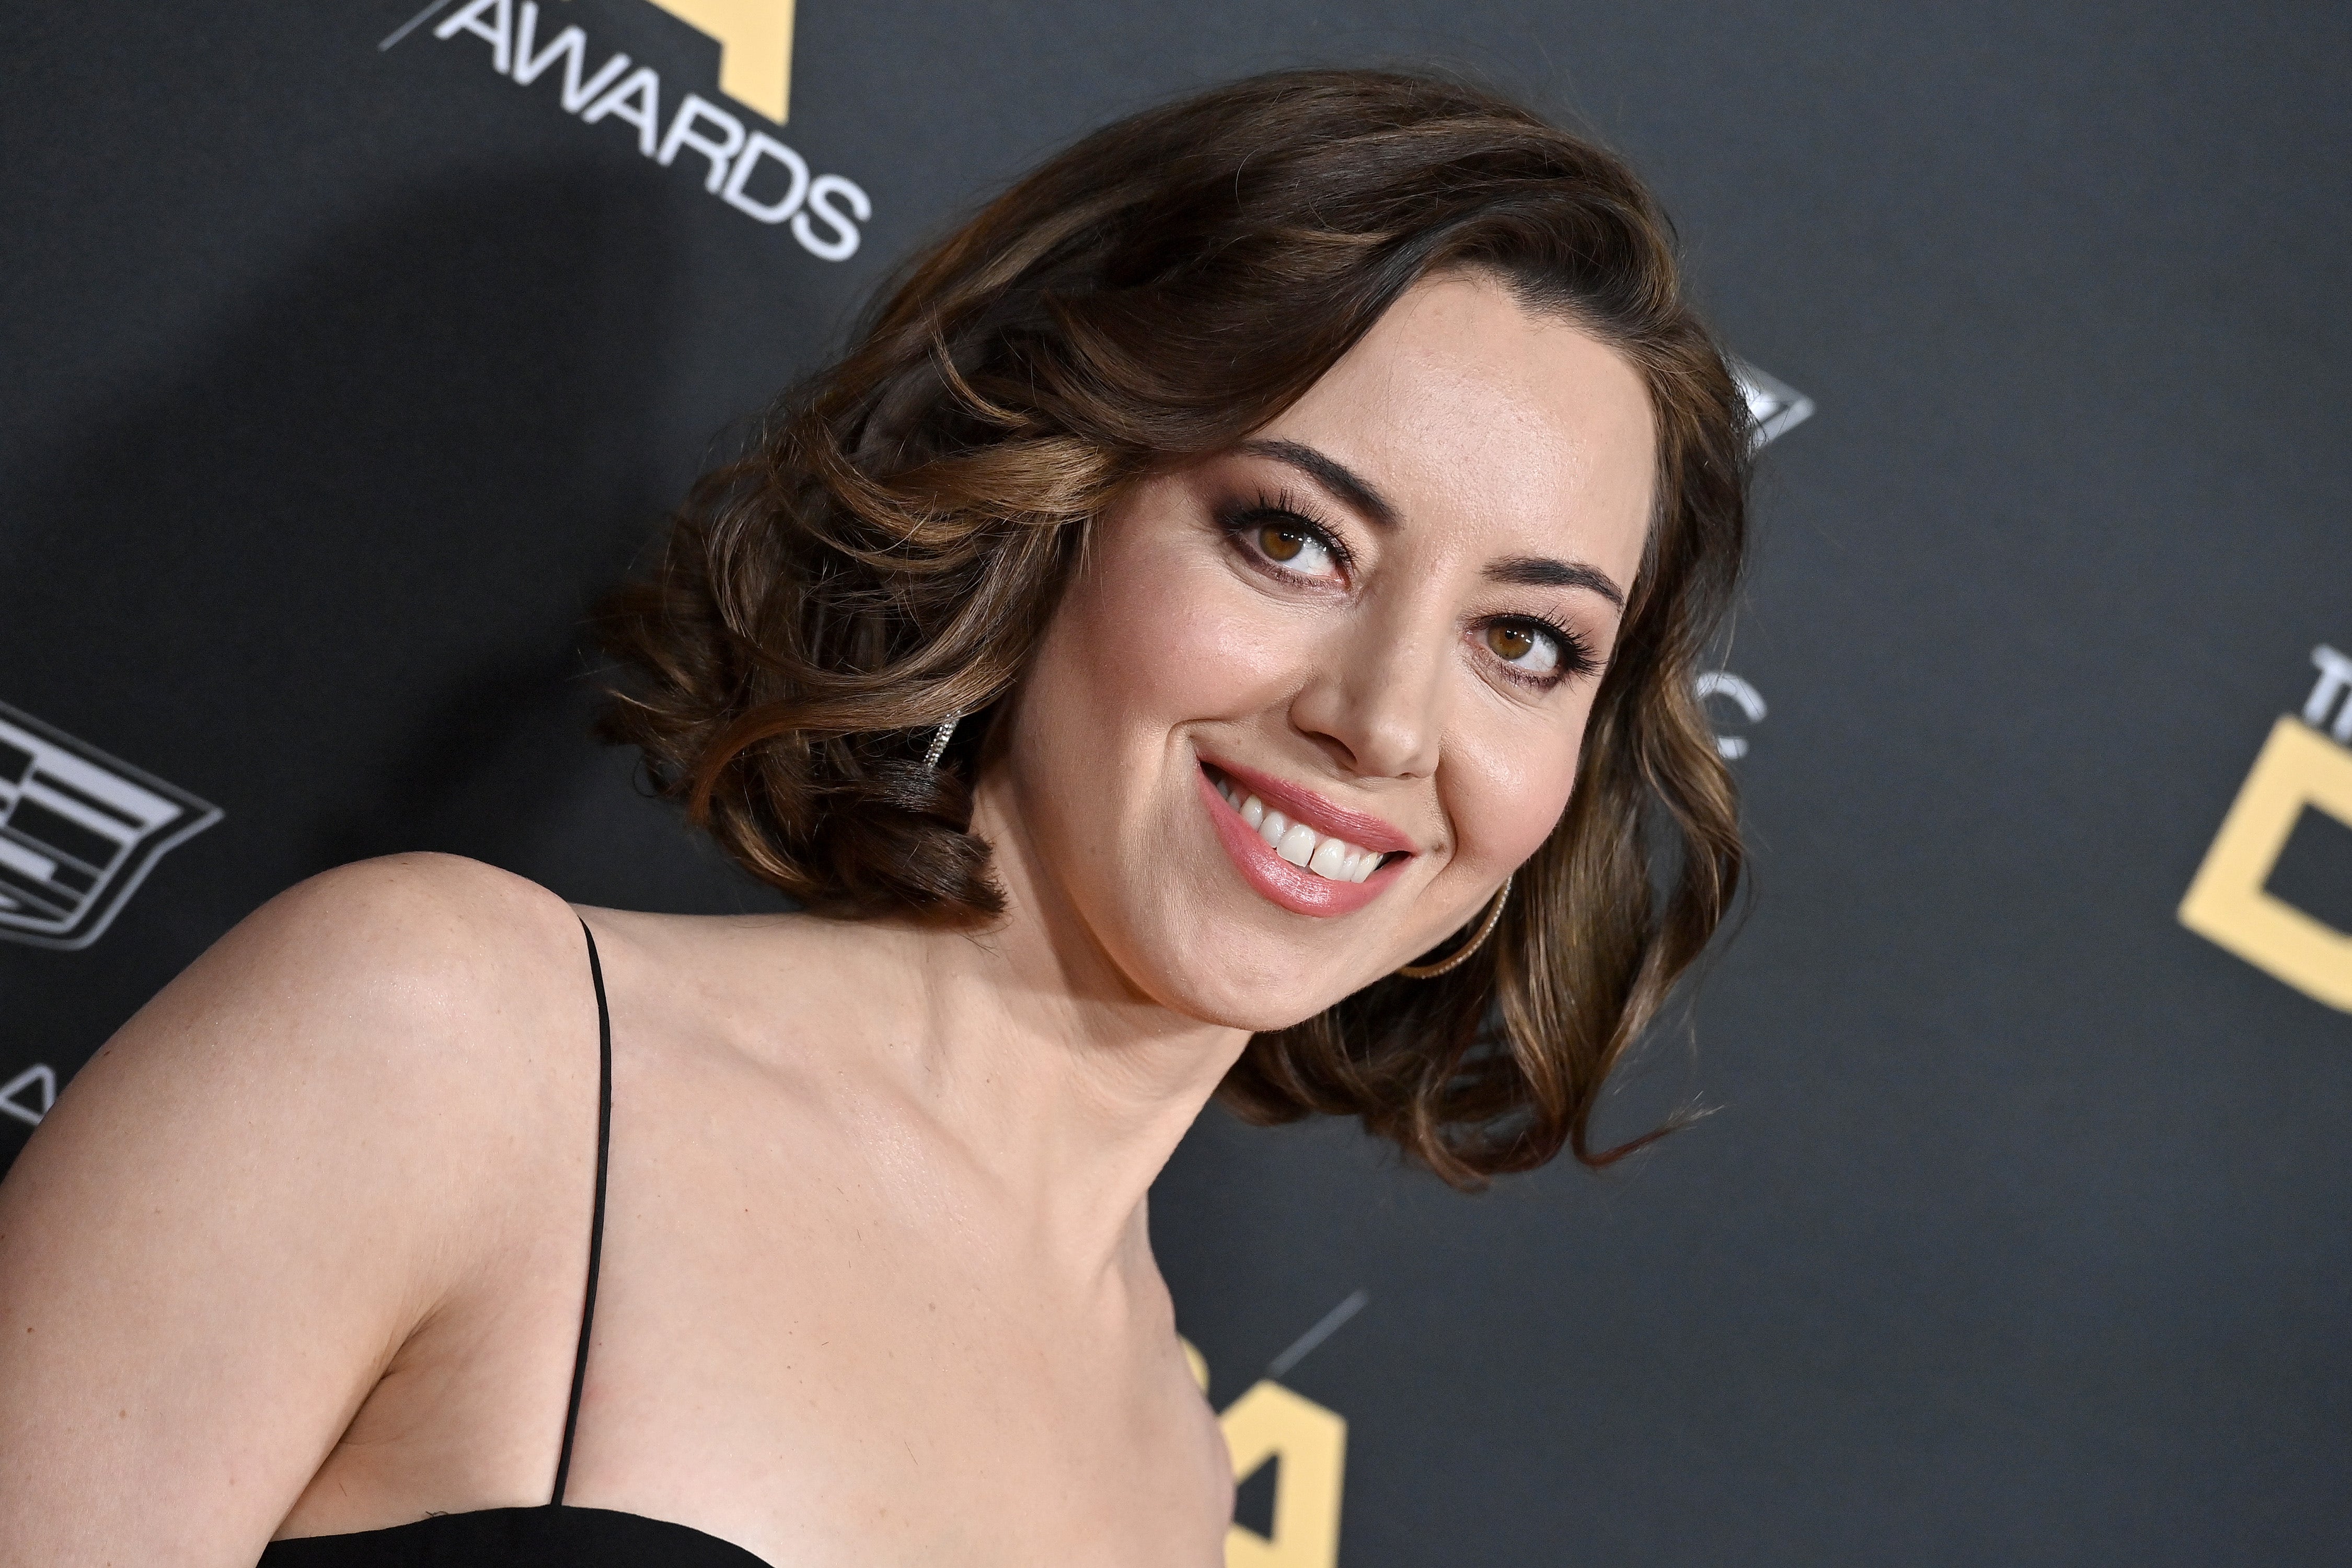 Aubrey Plaza shares why she stole a note from Biden's desk during 'Parks and Recreation' shoot